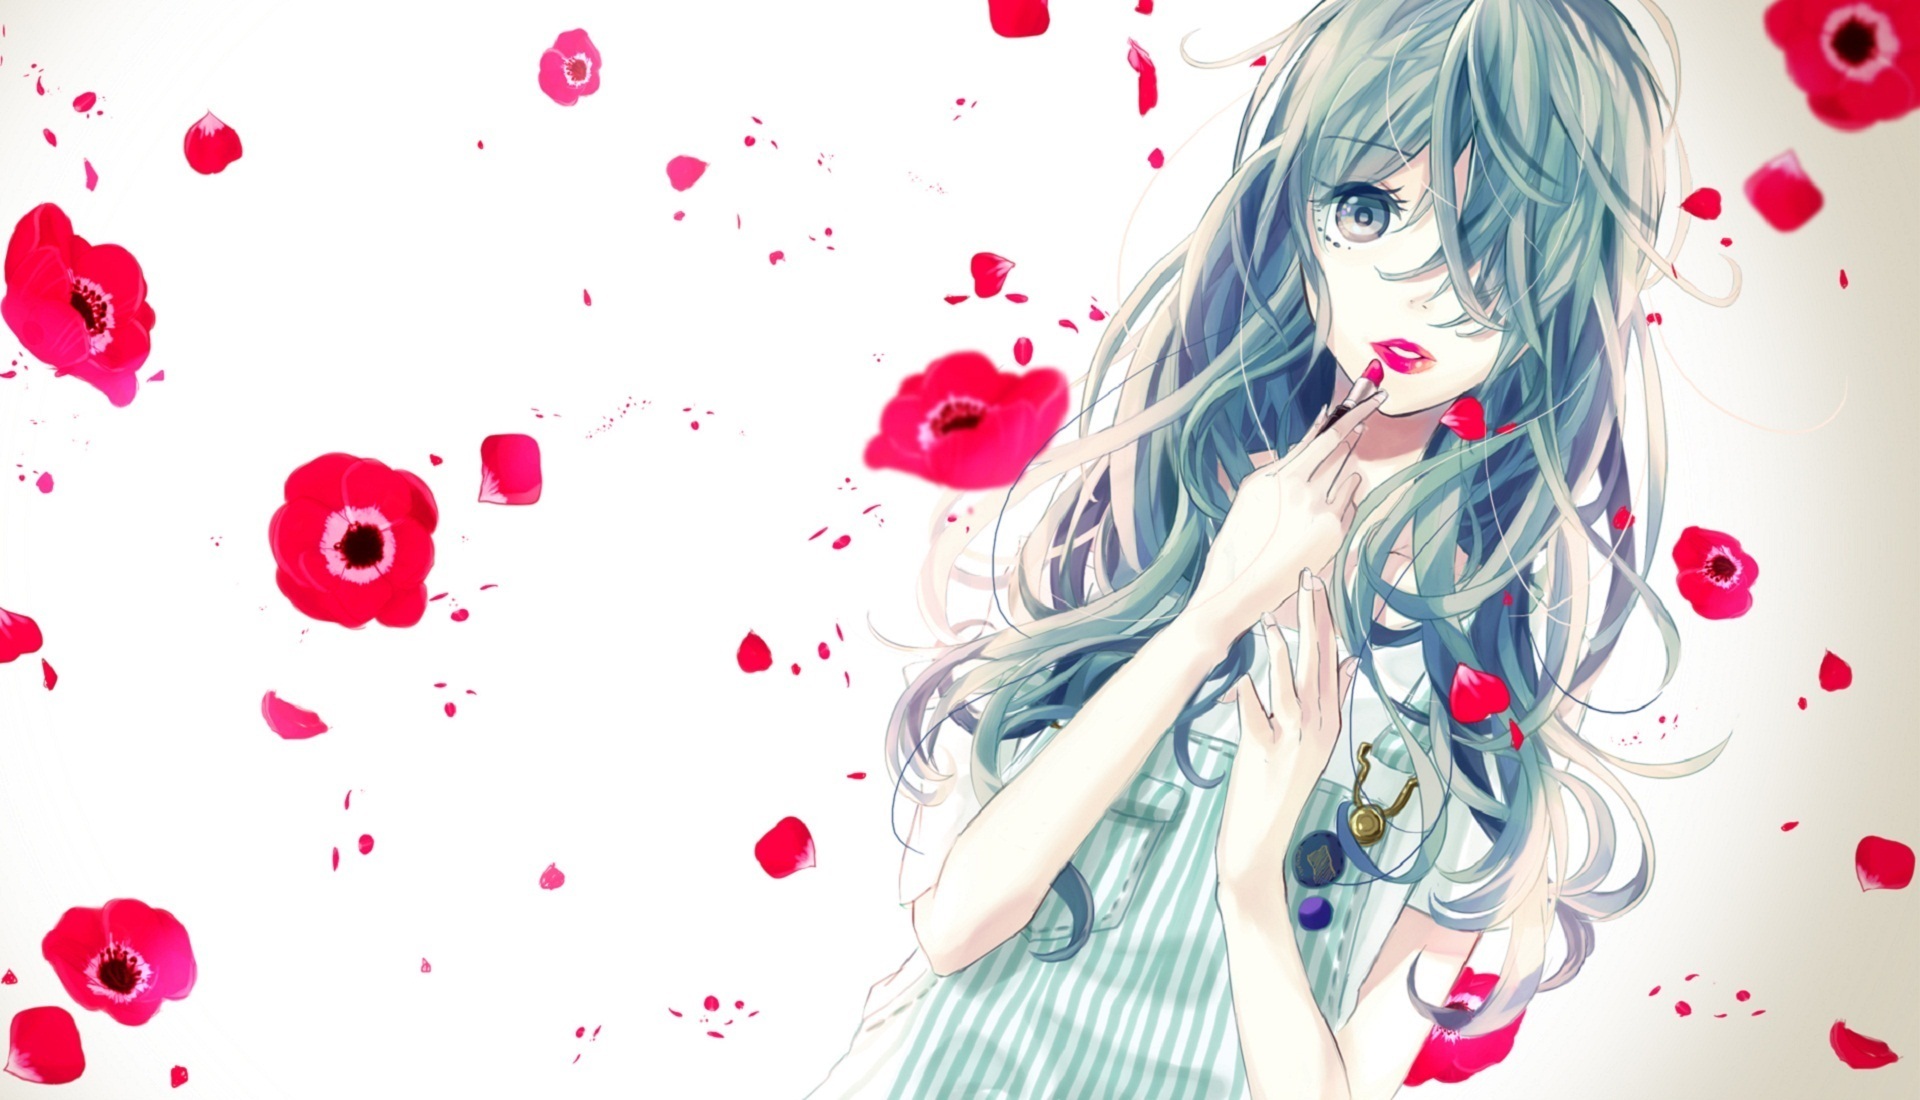  download Cute Anime Backgrounds Download HD Wallpapers 1920x1100